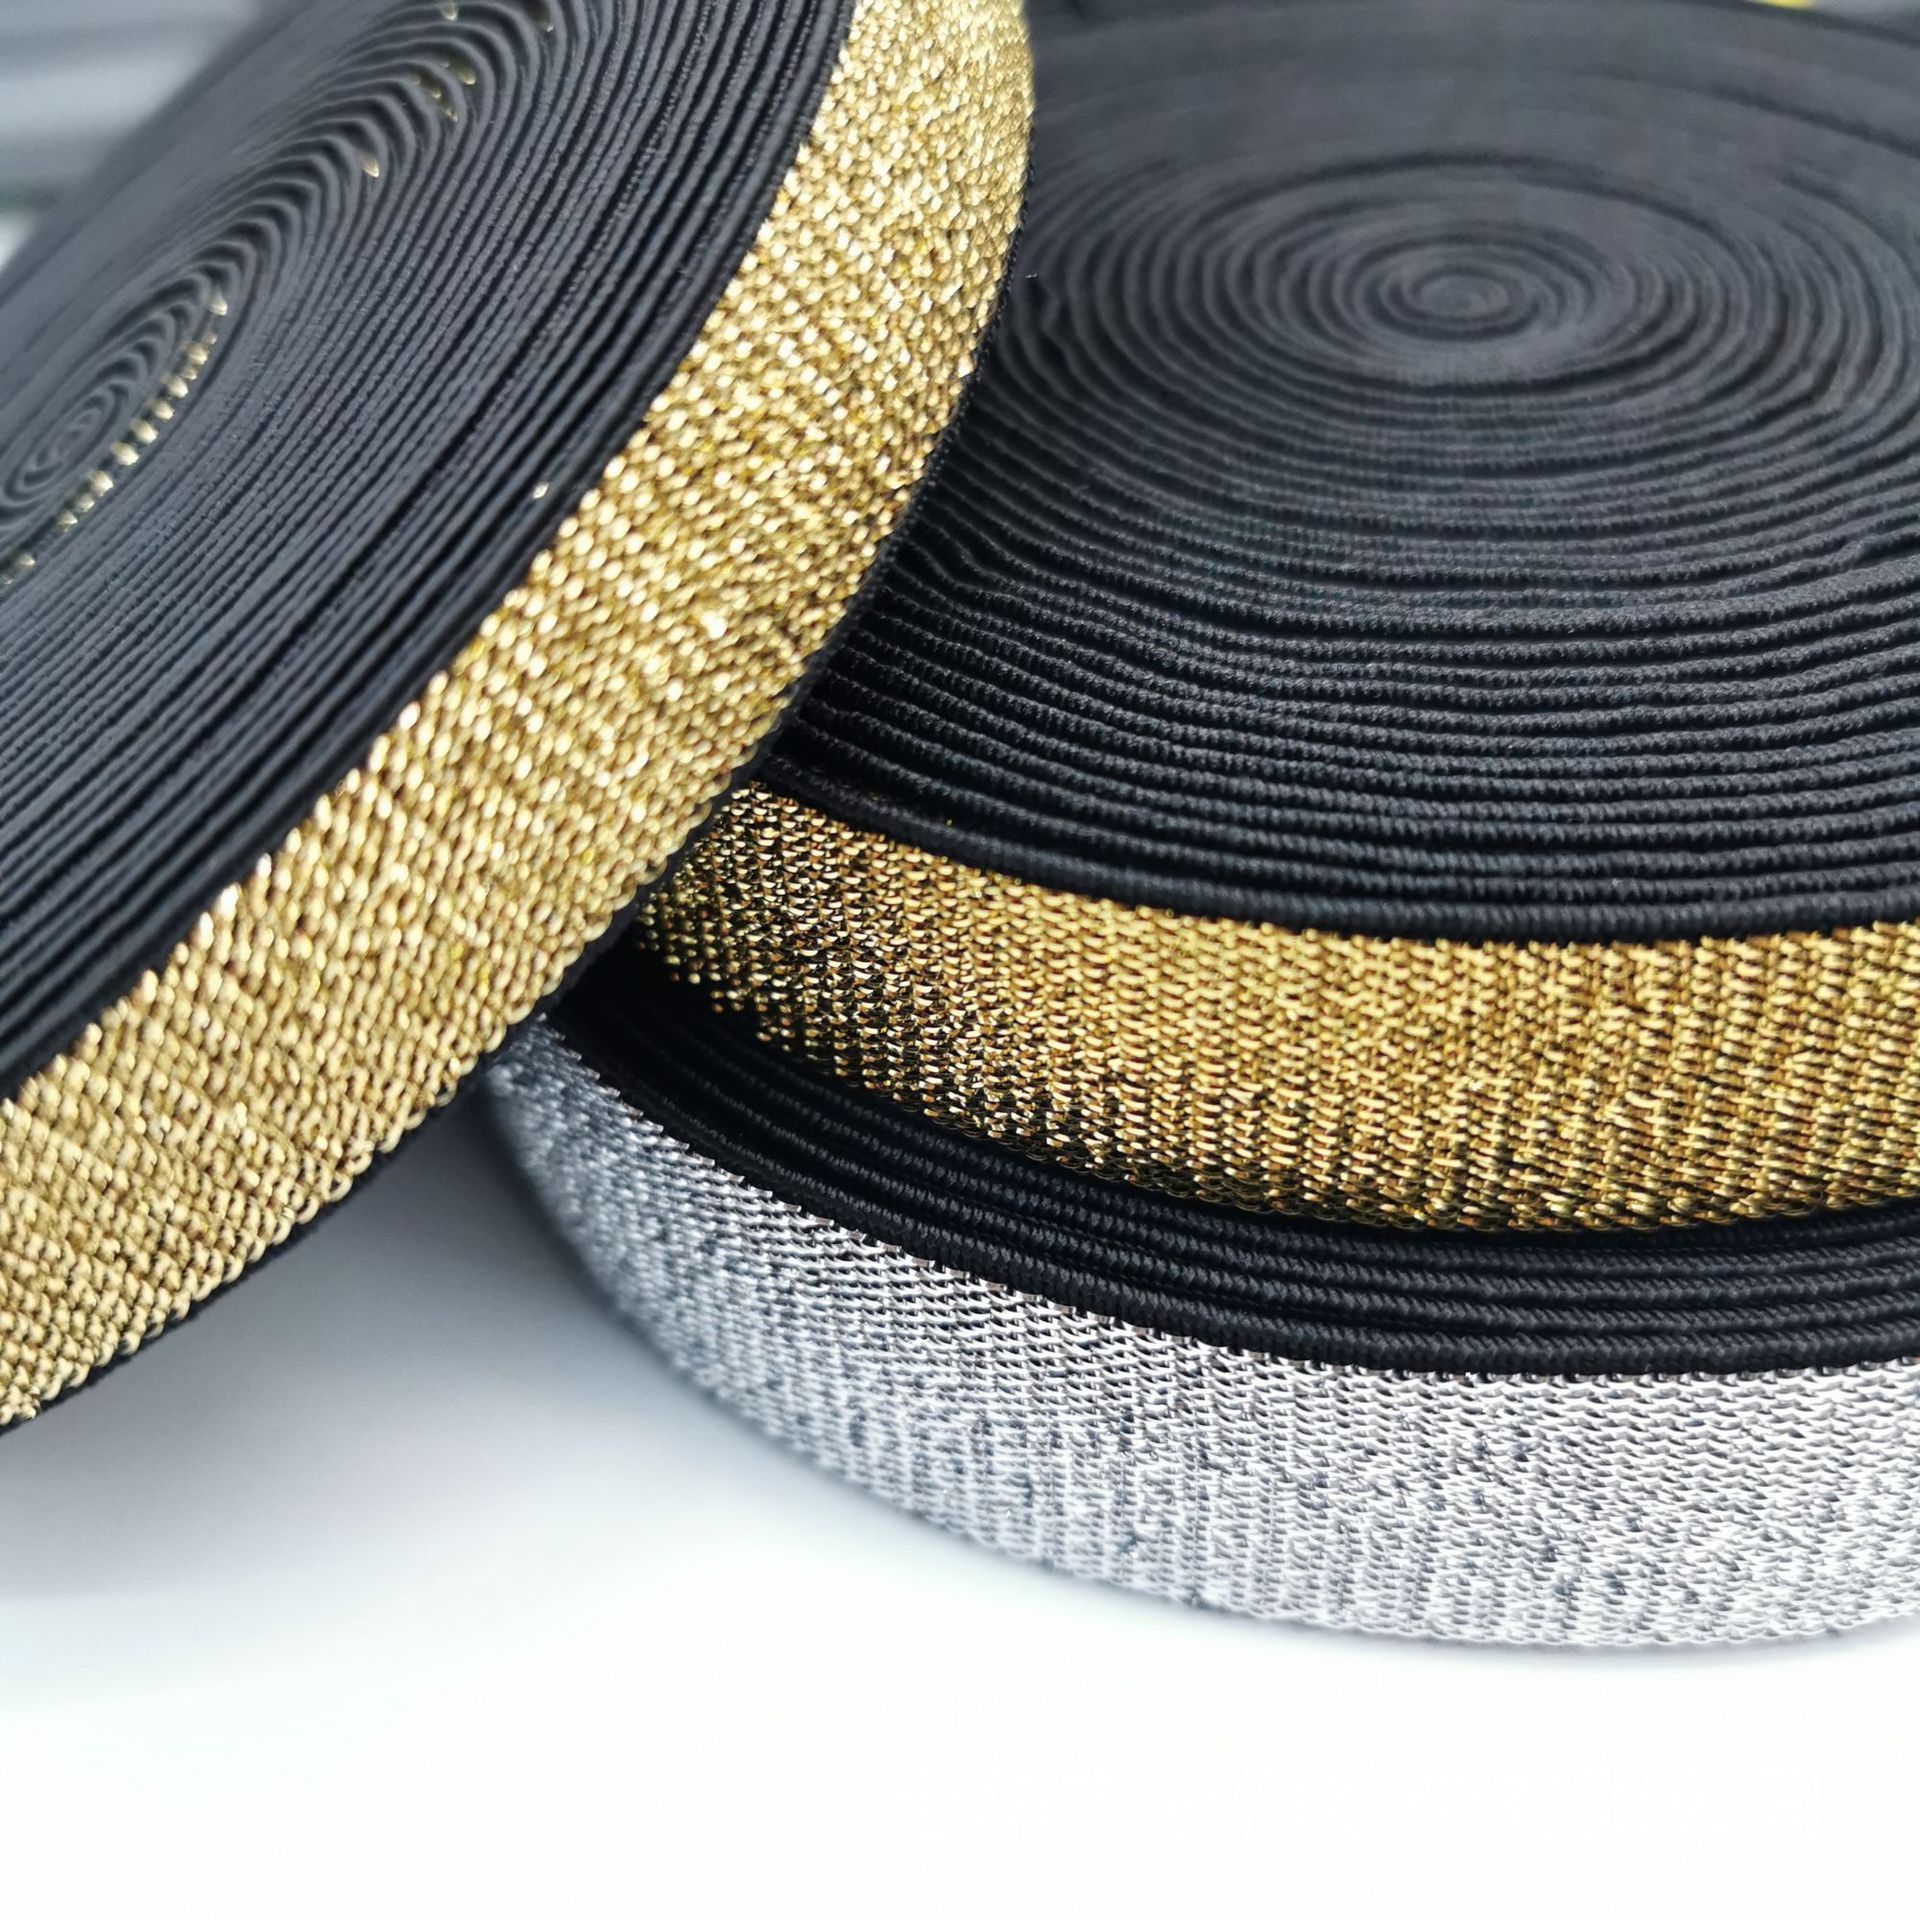 Spot Goods 1.0-5.0cm Golden and Silver Color Cord Elastic Elastic Band Brushed High Density Onion Silk Rubber Band DIY